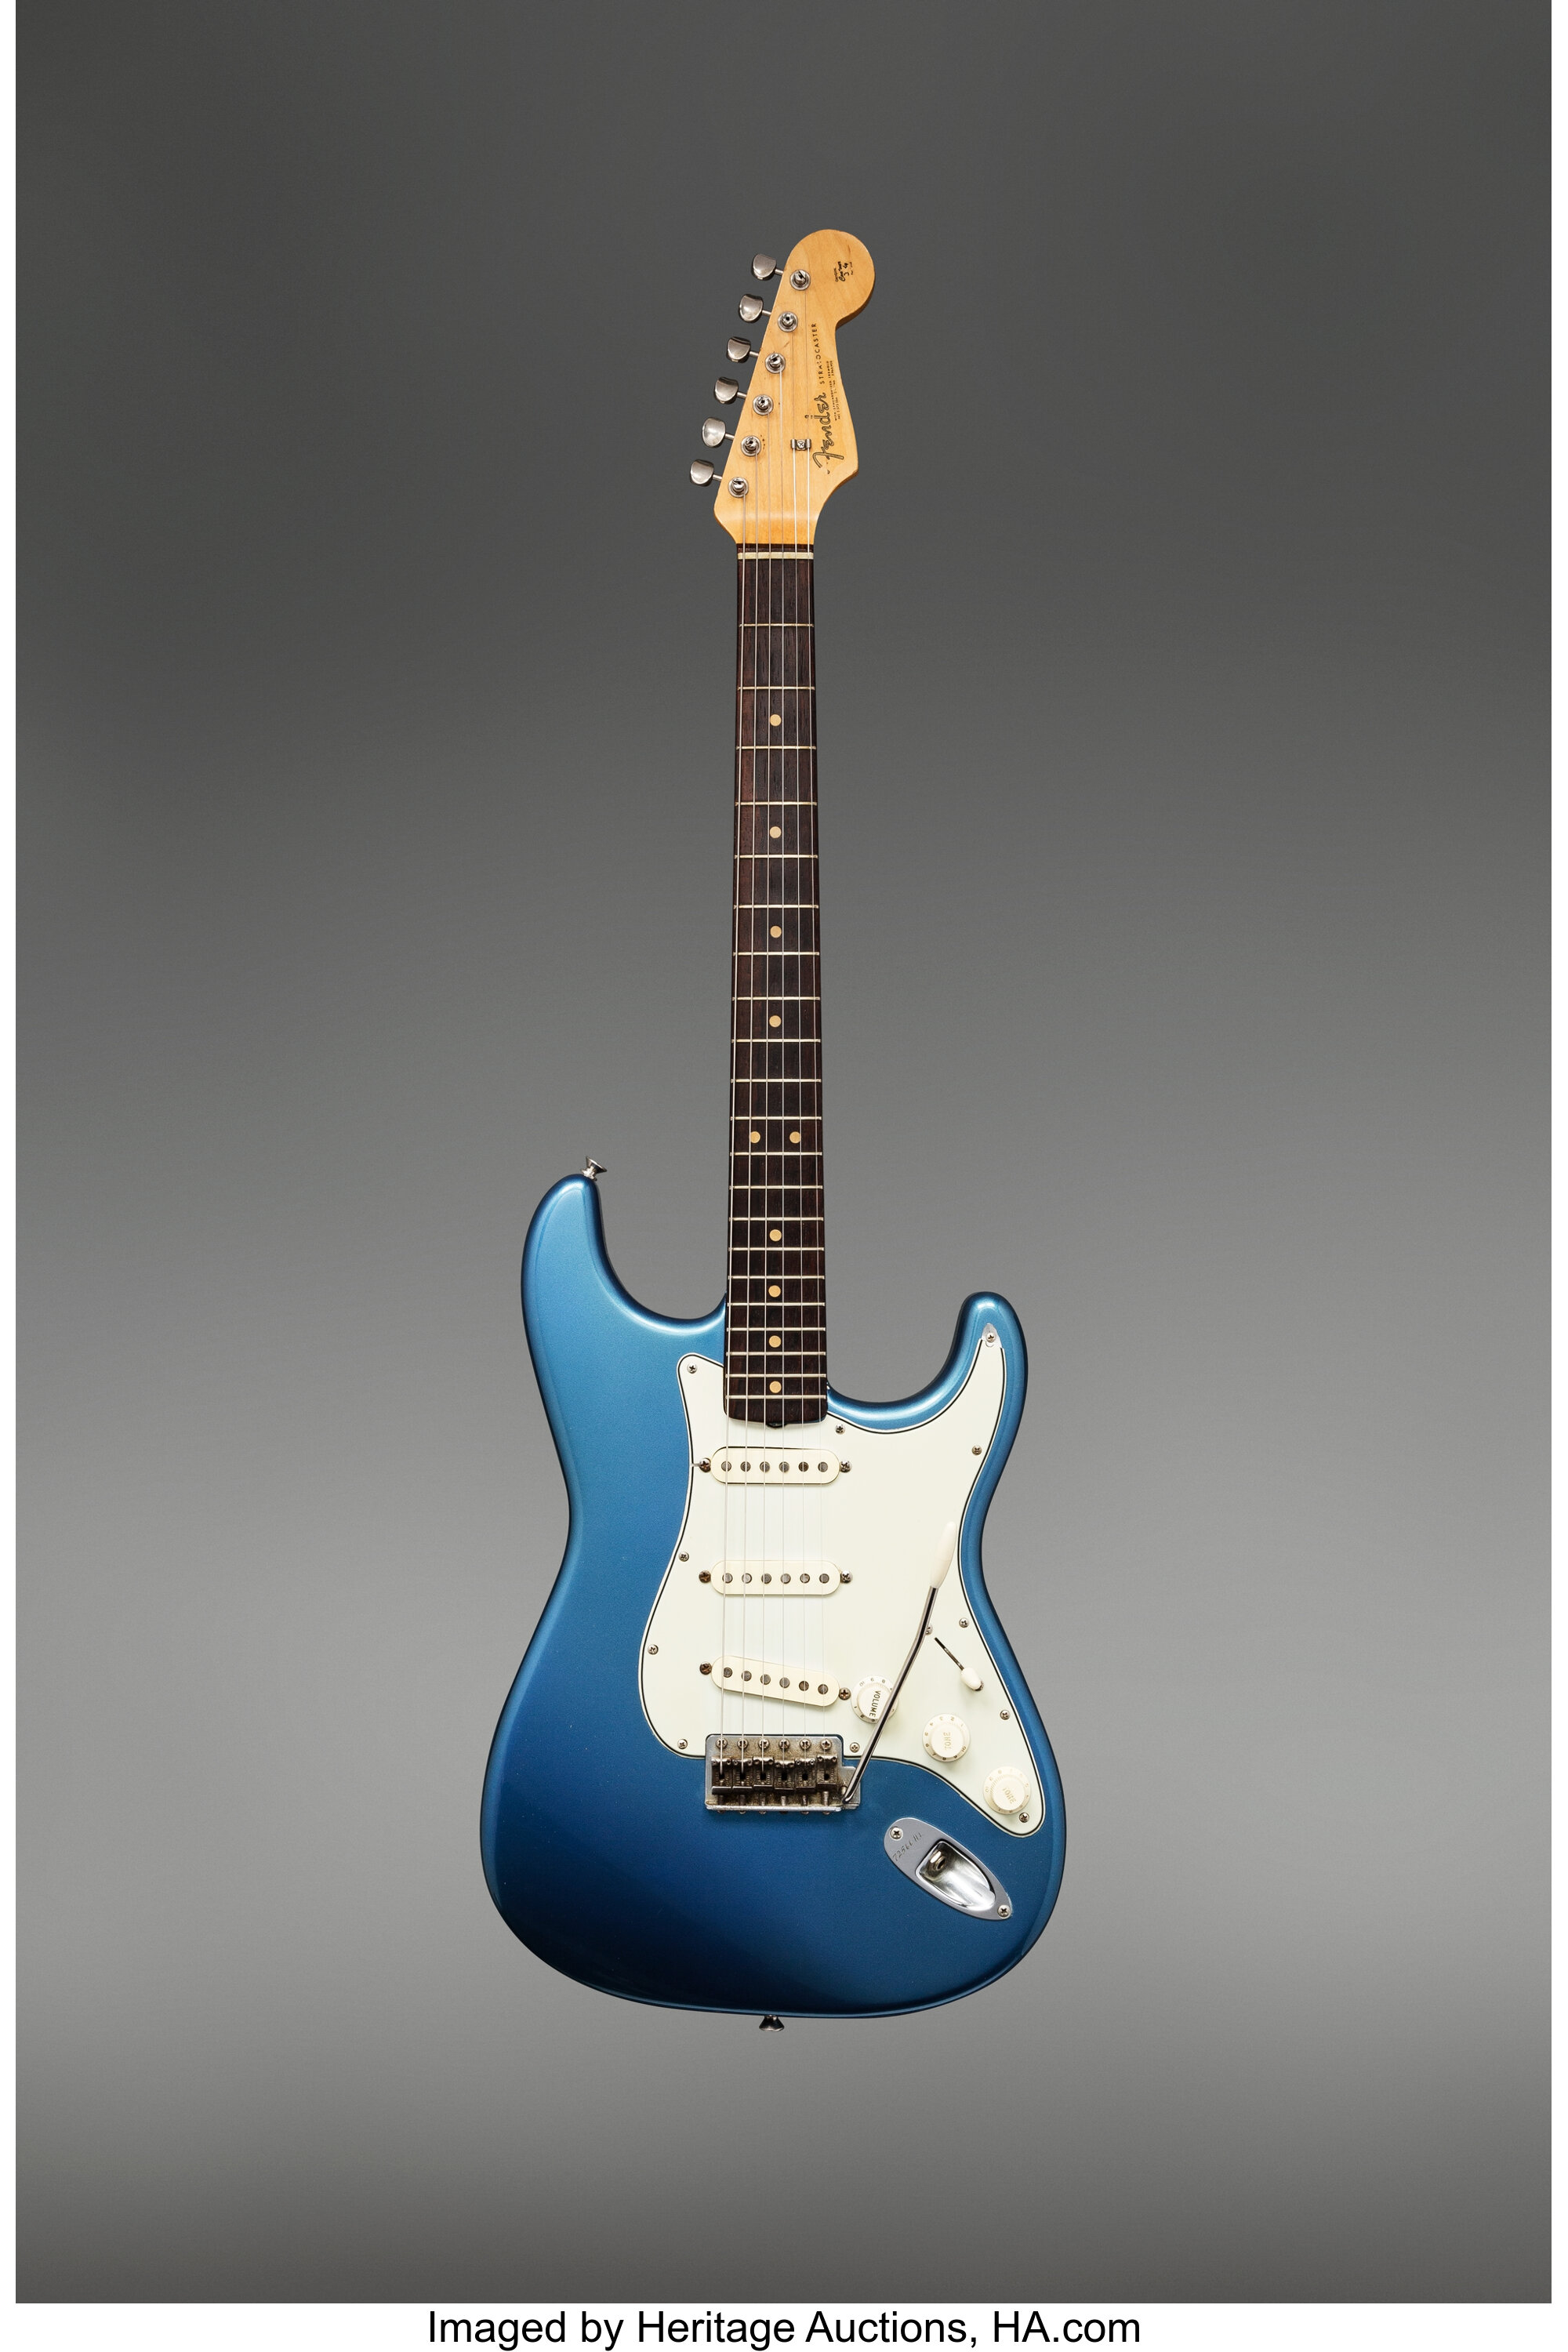 1964 Fender Stratocaster Lake Placid Blue Solid Body Electric